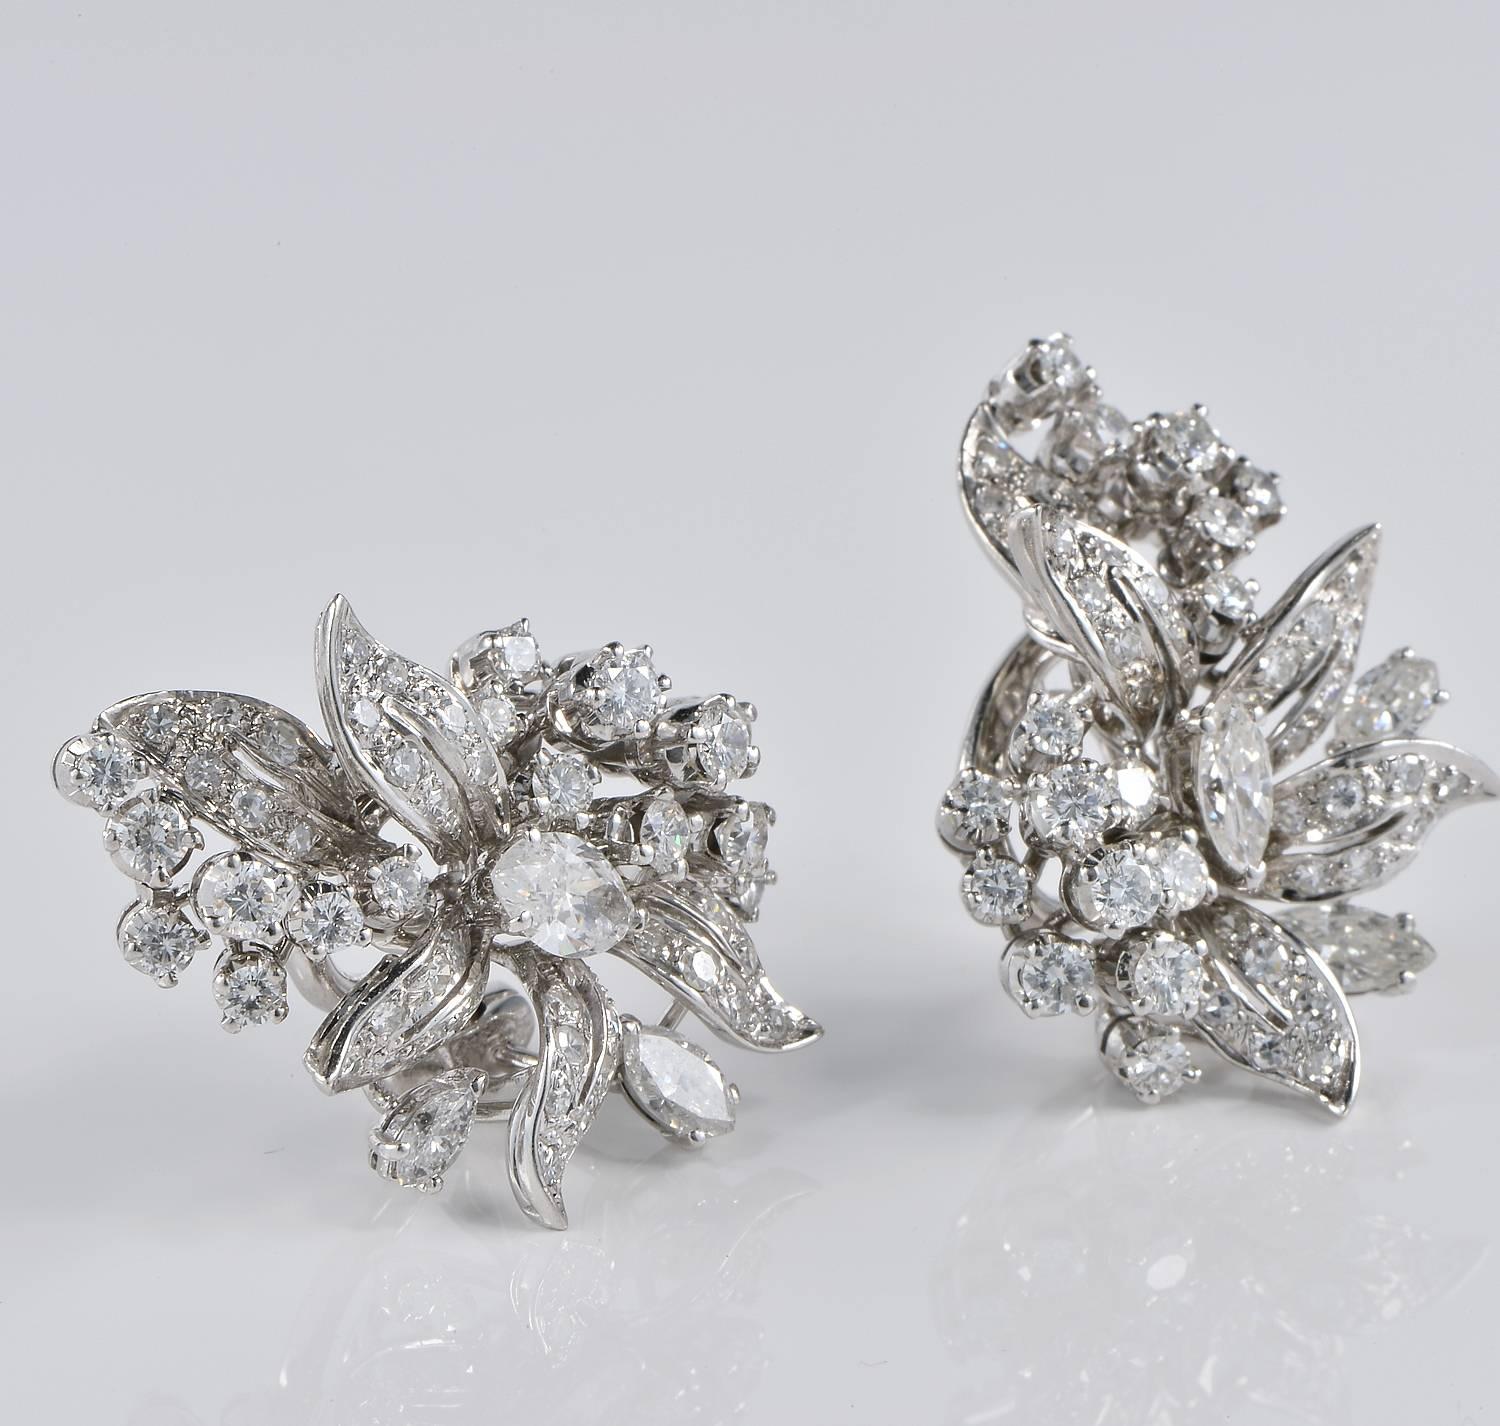 Glamorous pair of vintage Diamond earrings set with a fabulous selection of 5.0 Ct Diamond of various shape and cuts
Sophisticate Floral spray design so unique and appealing when worn
Hand crafted during 1950 ca of solid 18 KT white gold- Italian